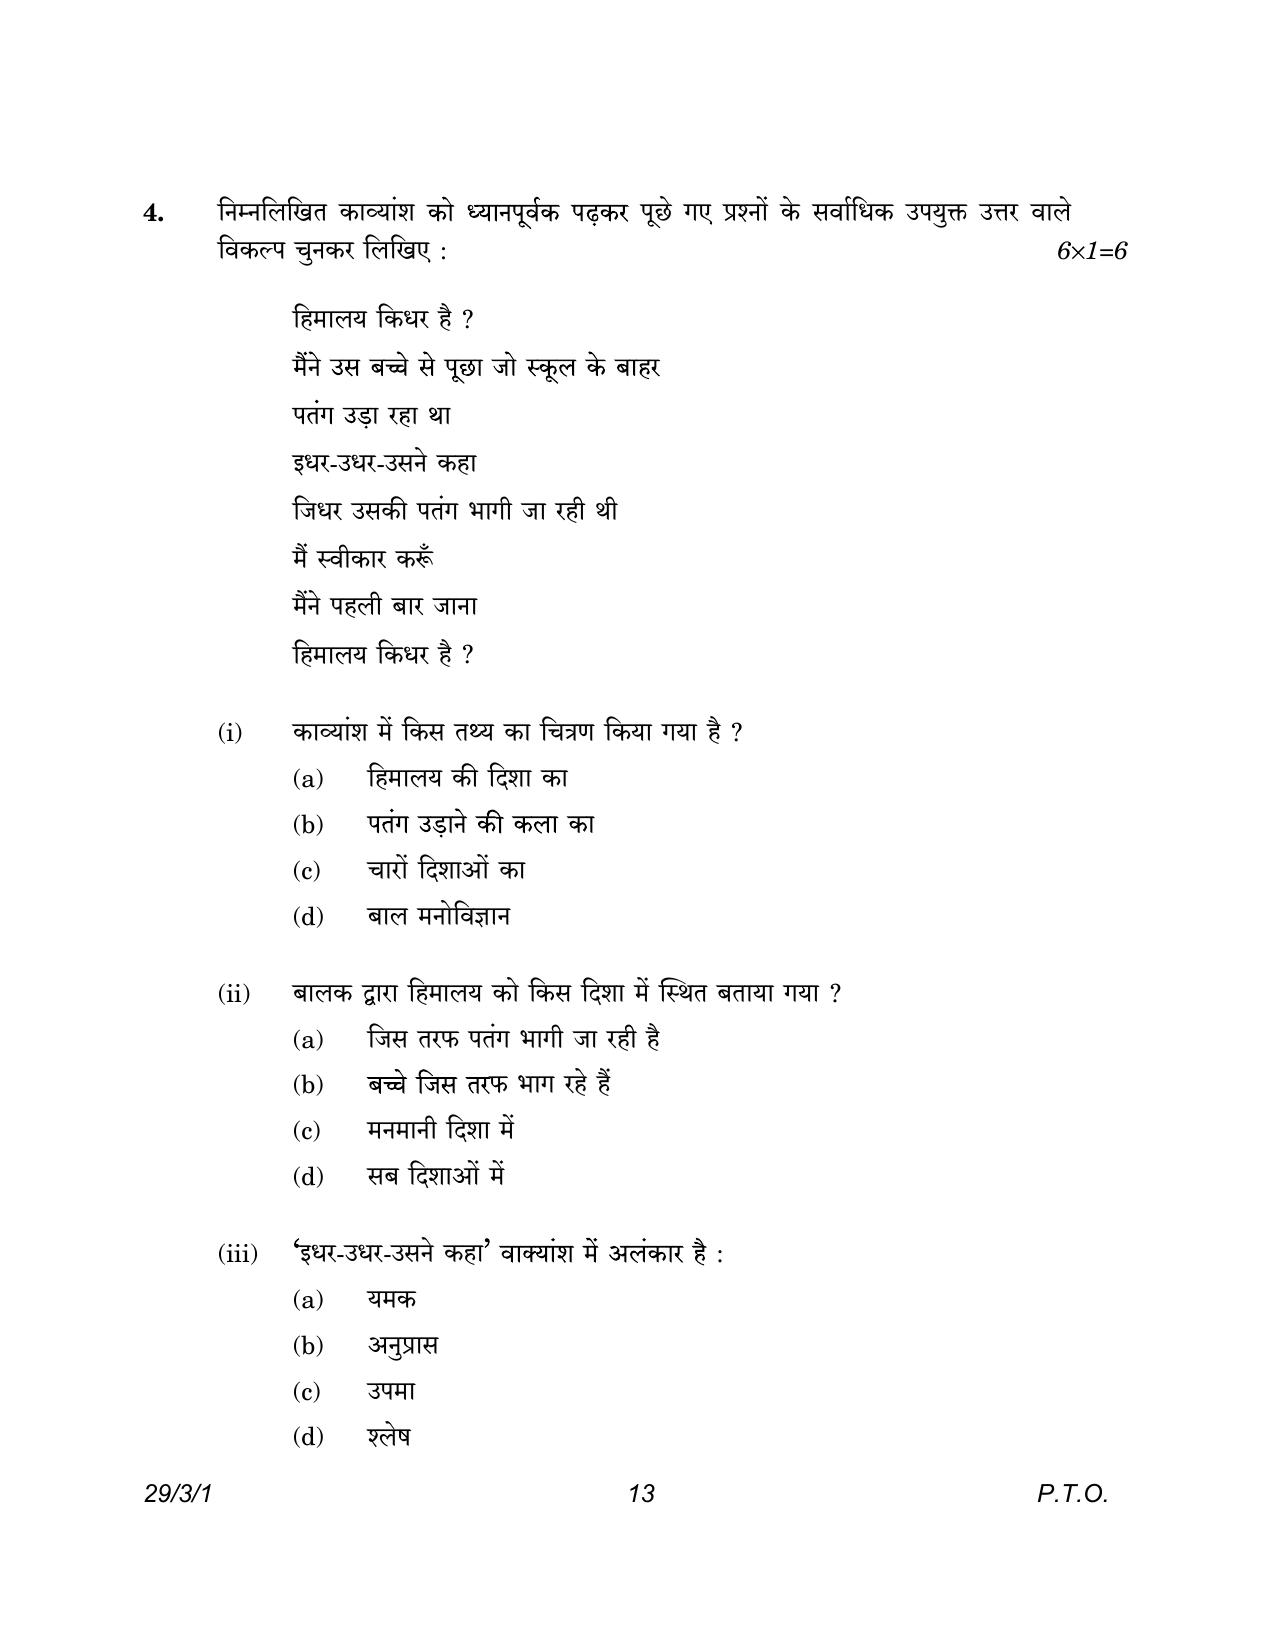 CBSE Class 12 29-3-1 Hindi Elective 2023 Question Paper - Page 13